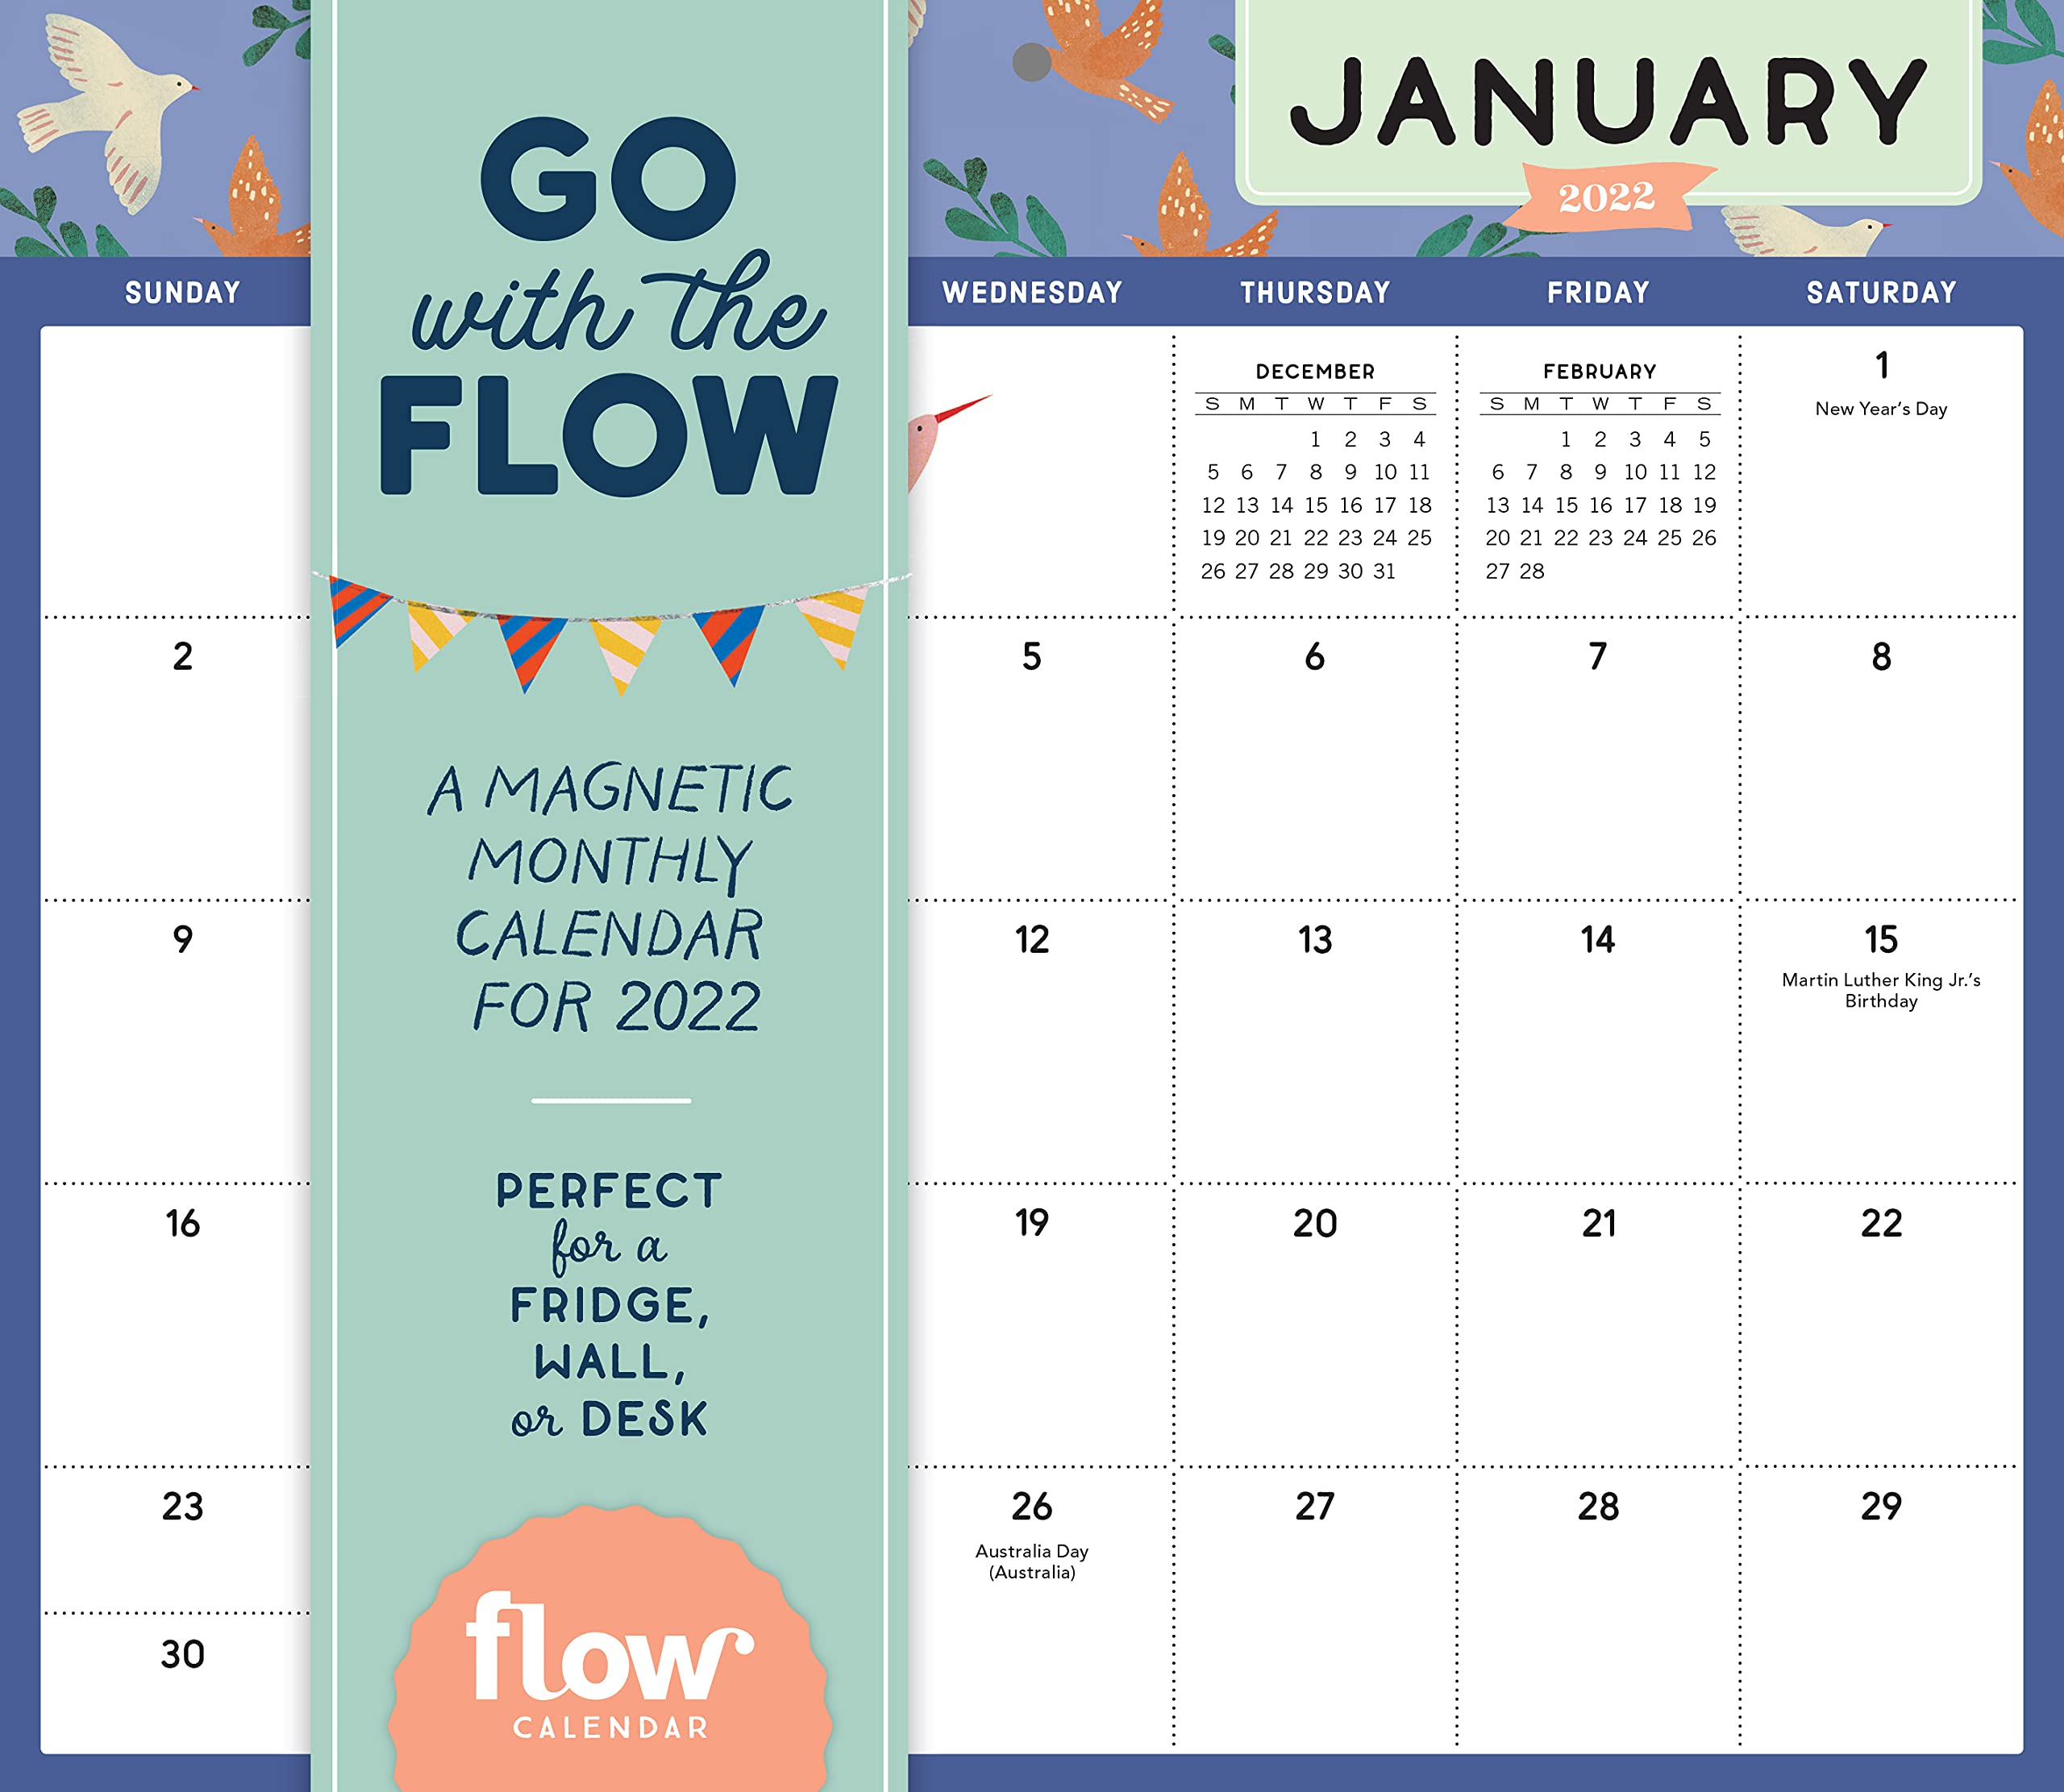 Calendar 2022 - Go with the Flow, magnetic monthly calendar | Workman Publishing